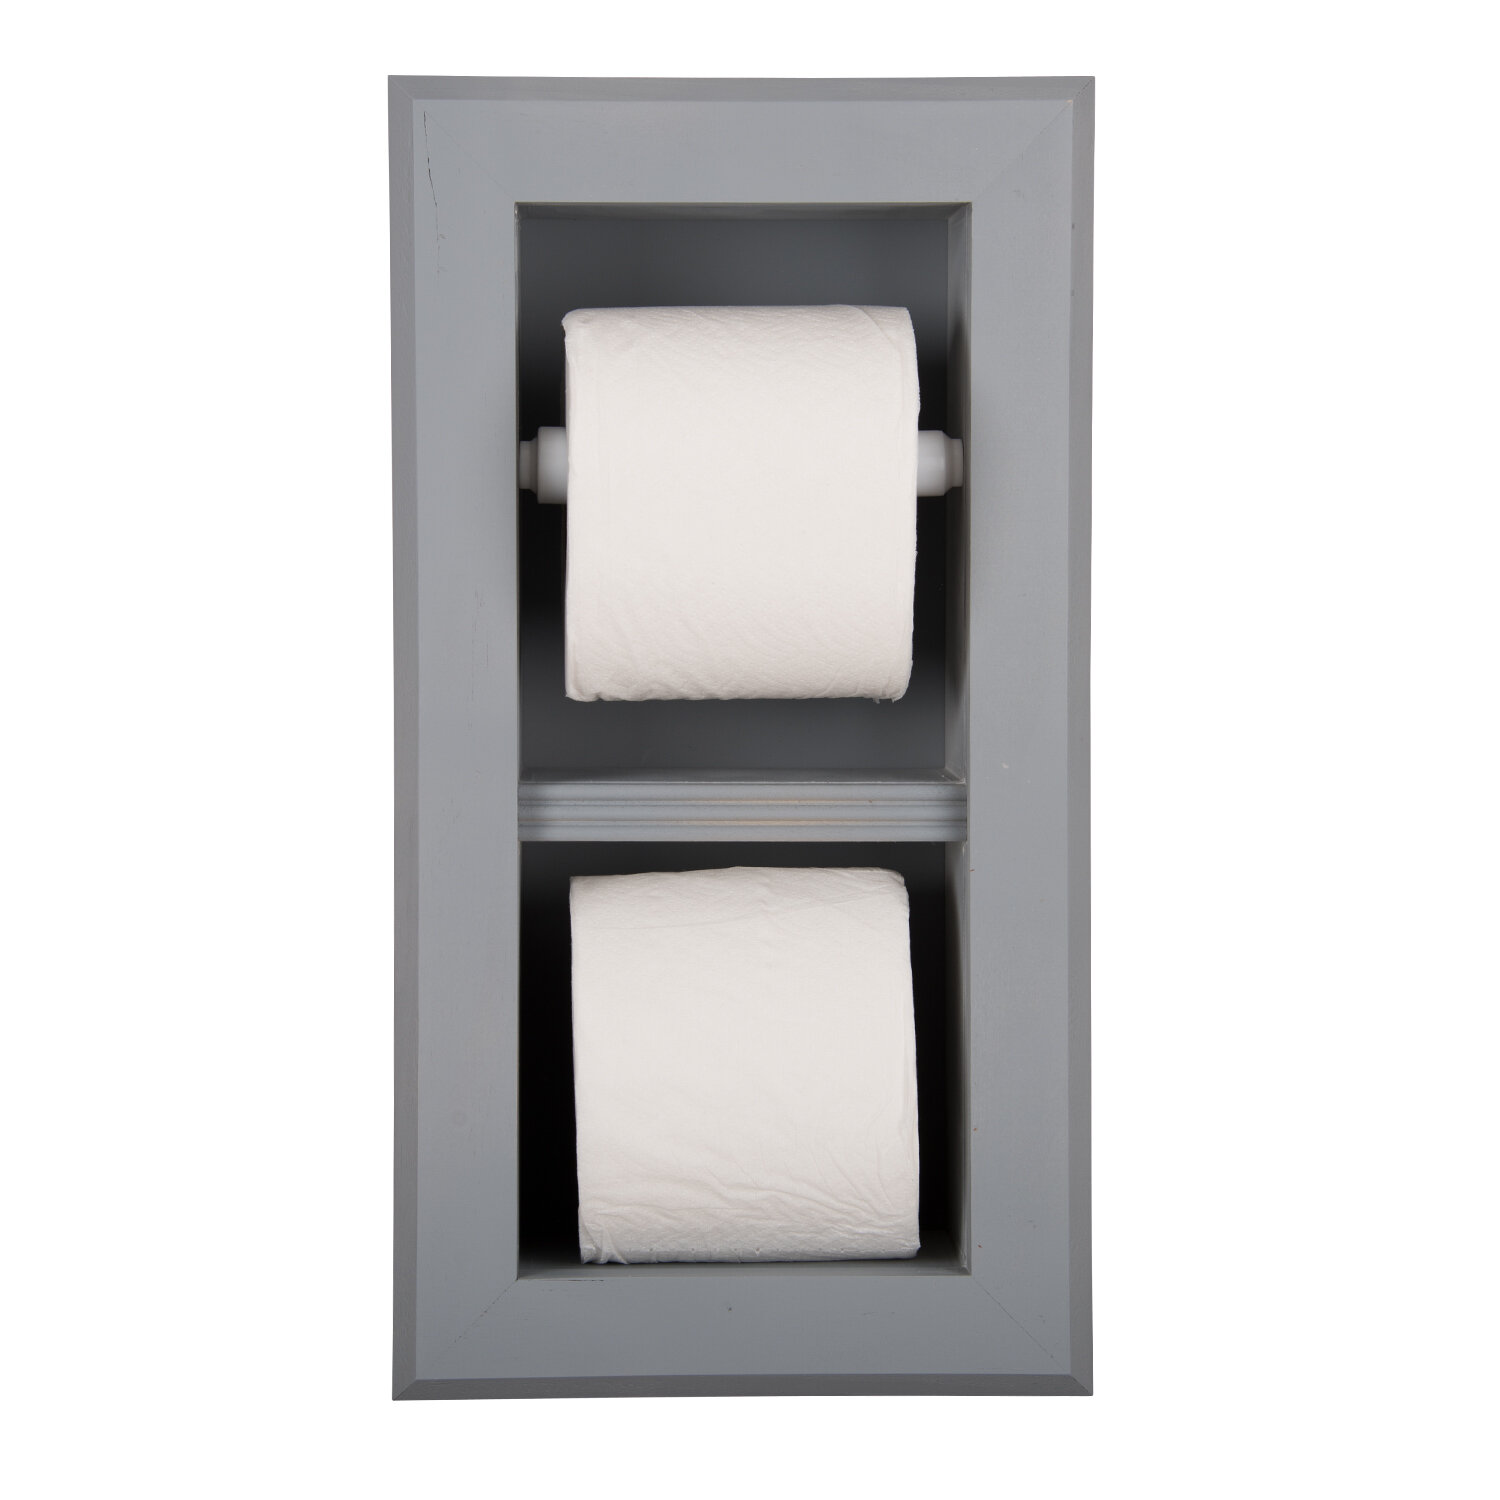 Turtles and Tails: Recessed Toilet Paper Holder (aka working with